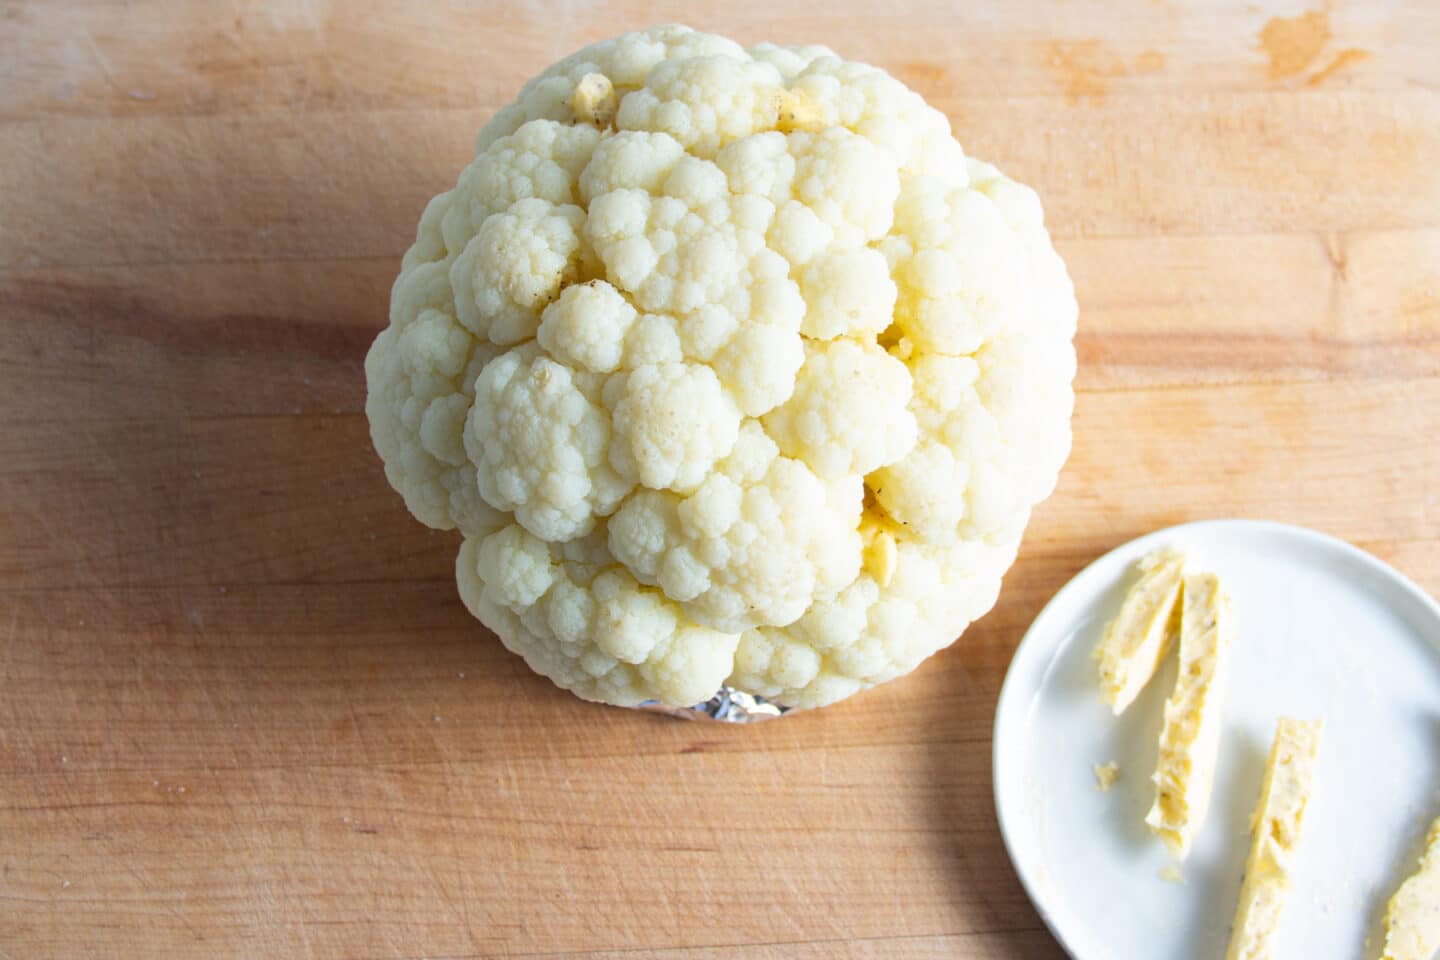 Picture of cauliflower being rubbed with butter.